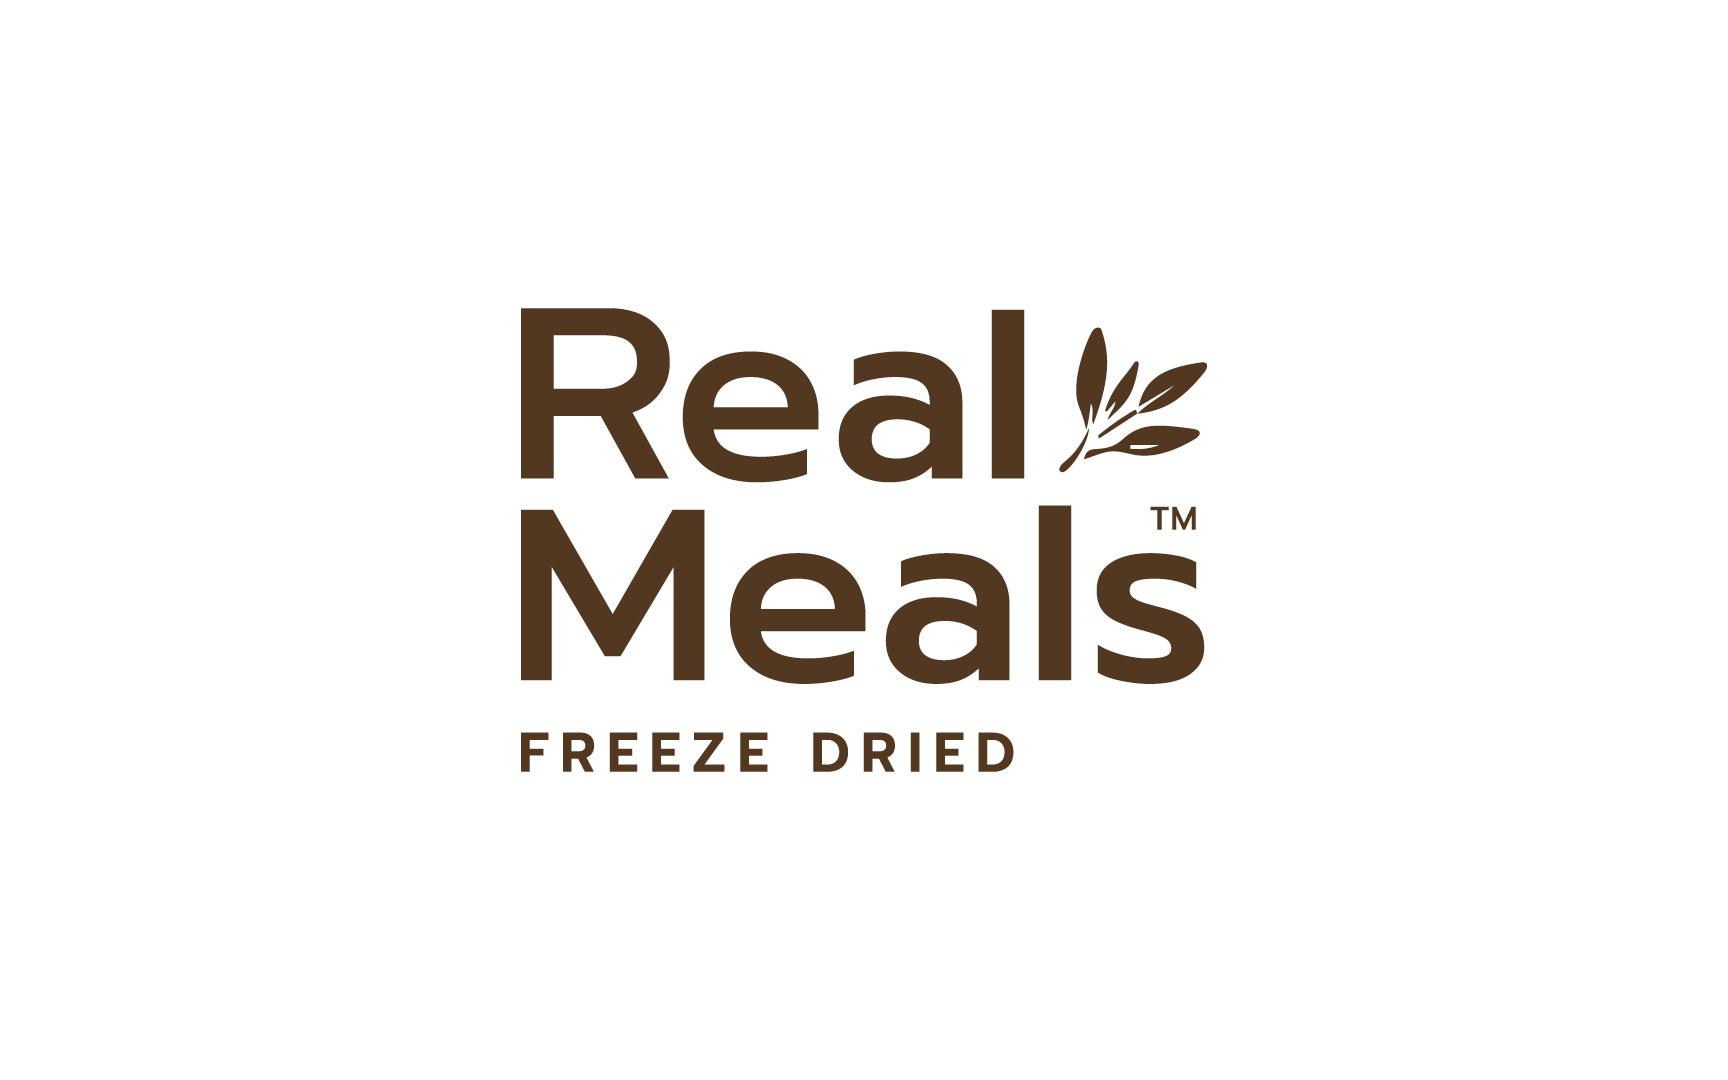 A brand that is real. We helped Absolute Wilderness navigate a very successful rebrand to Real Meals to drive brand loyalty & sales.